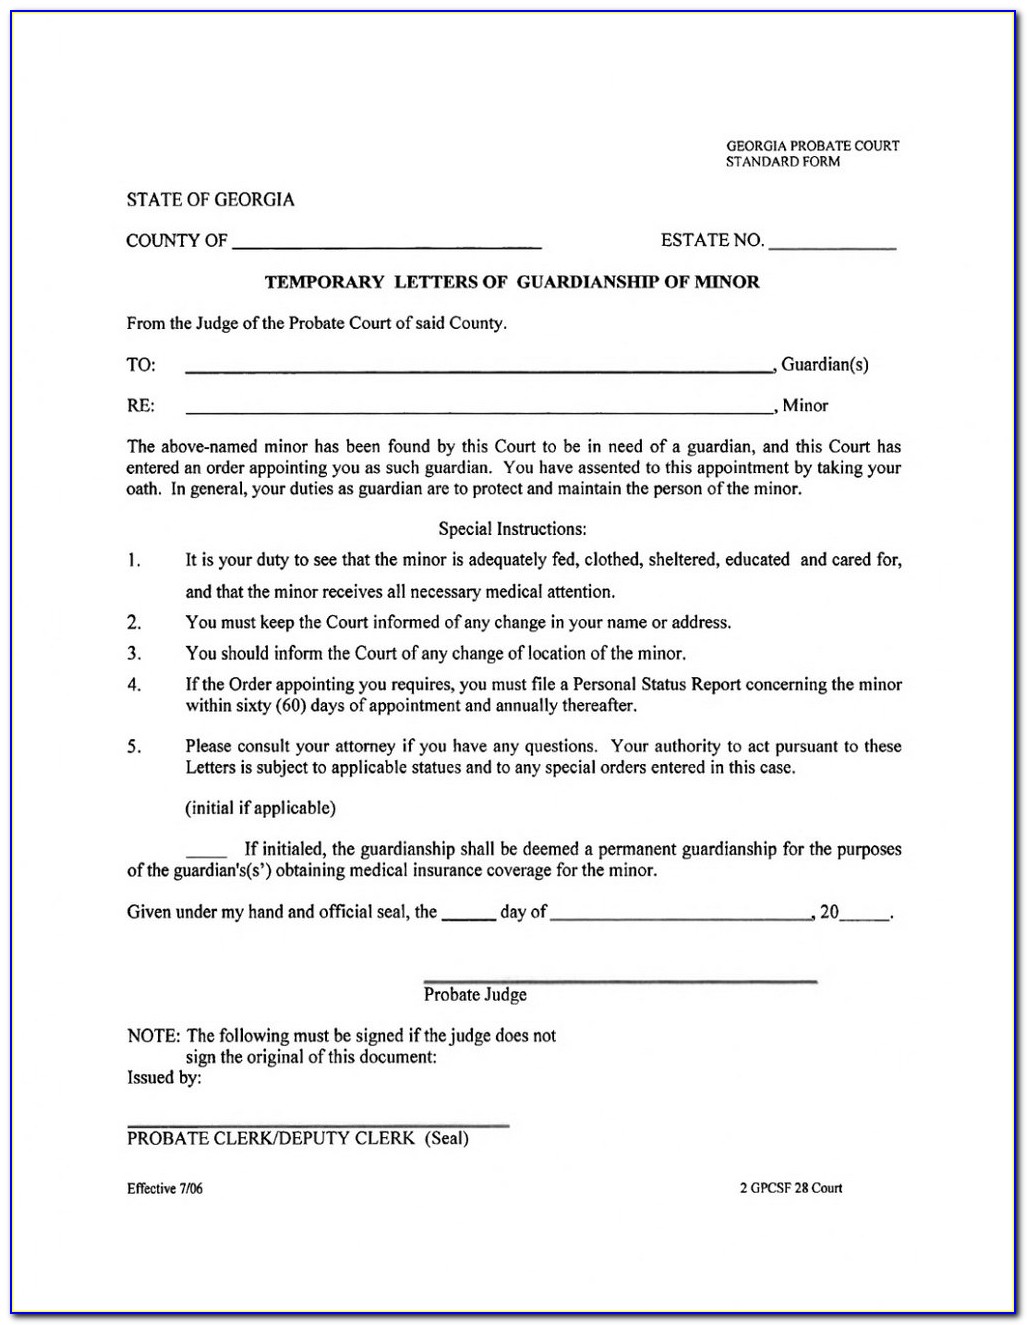 New Hampshire Divorce Forms